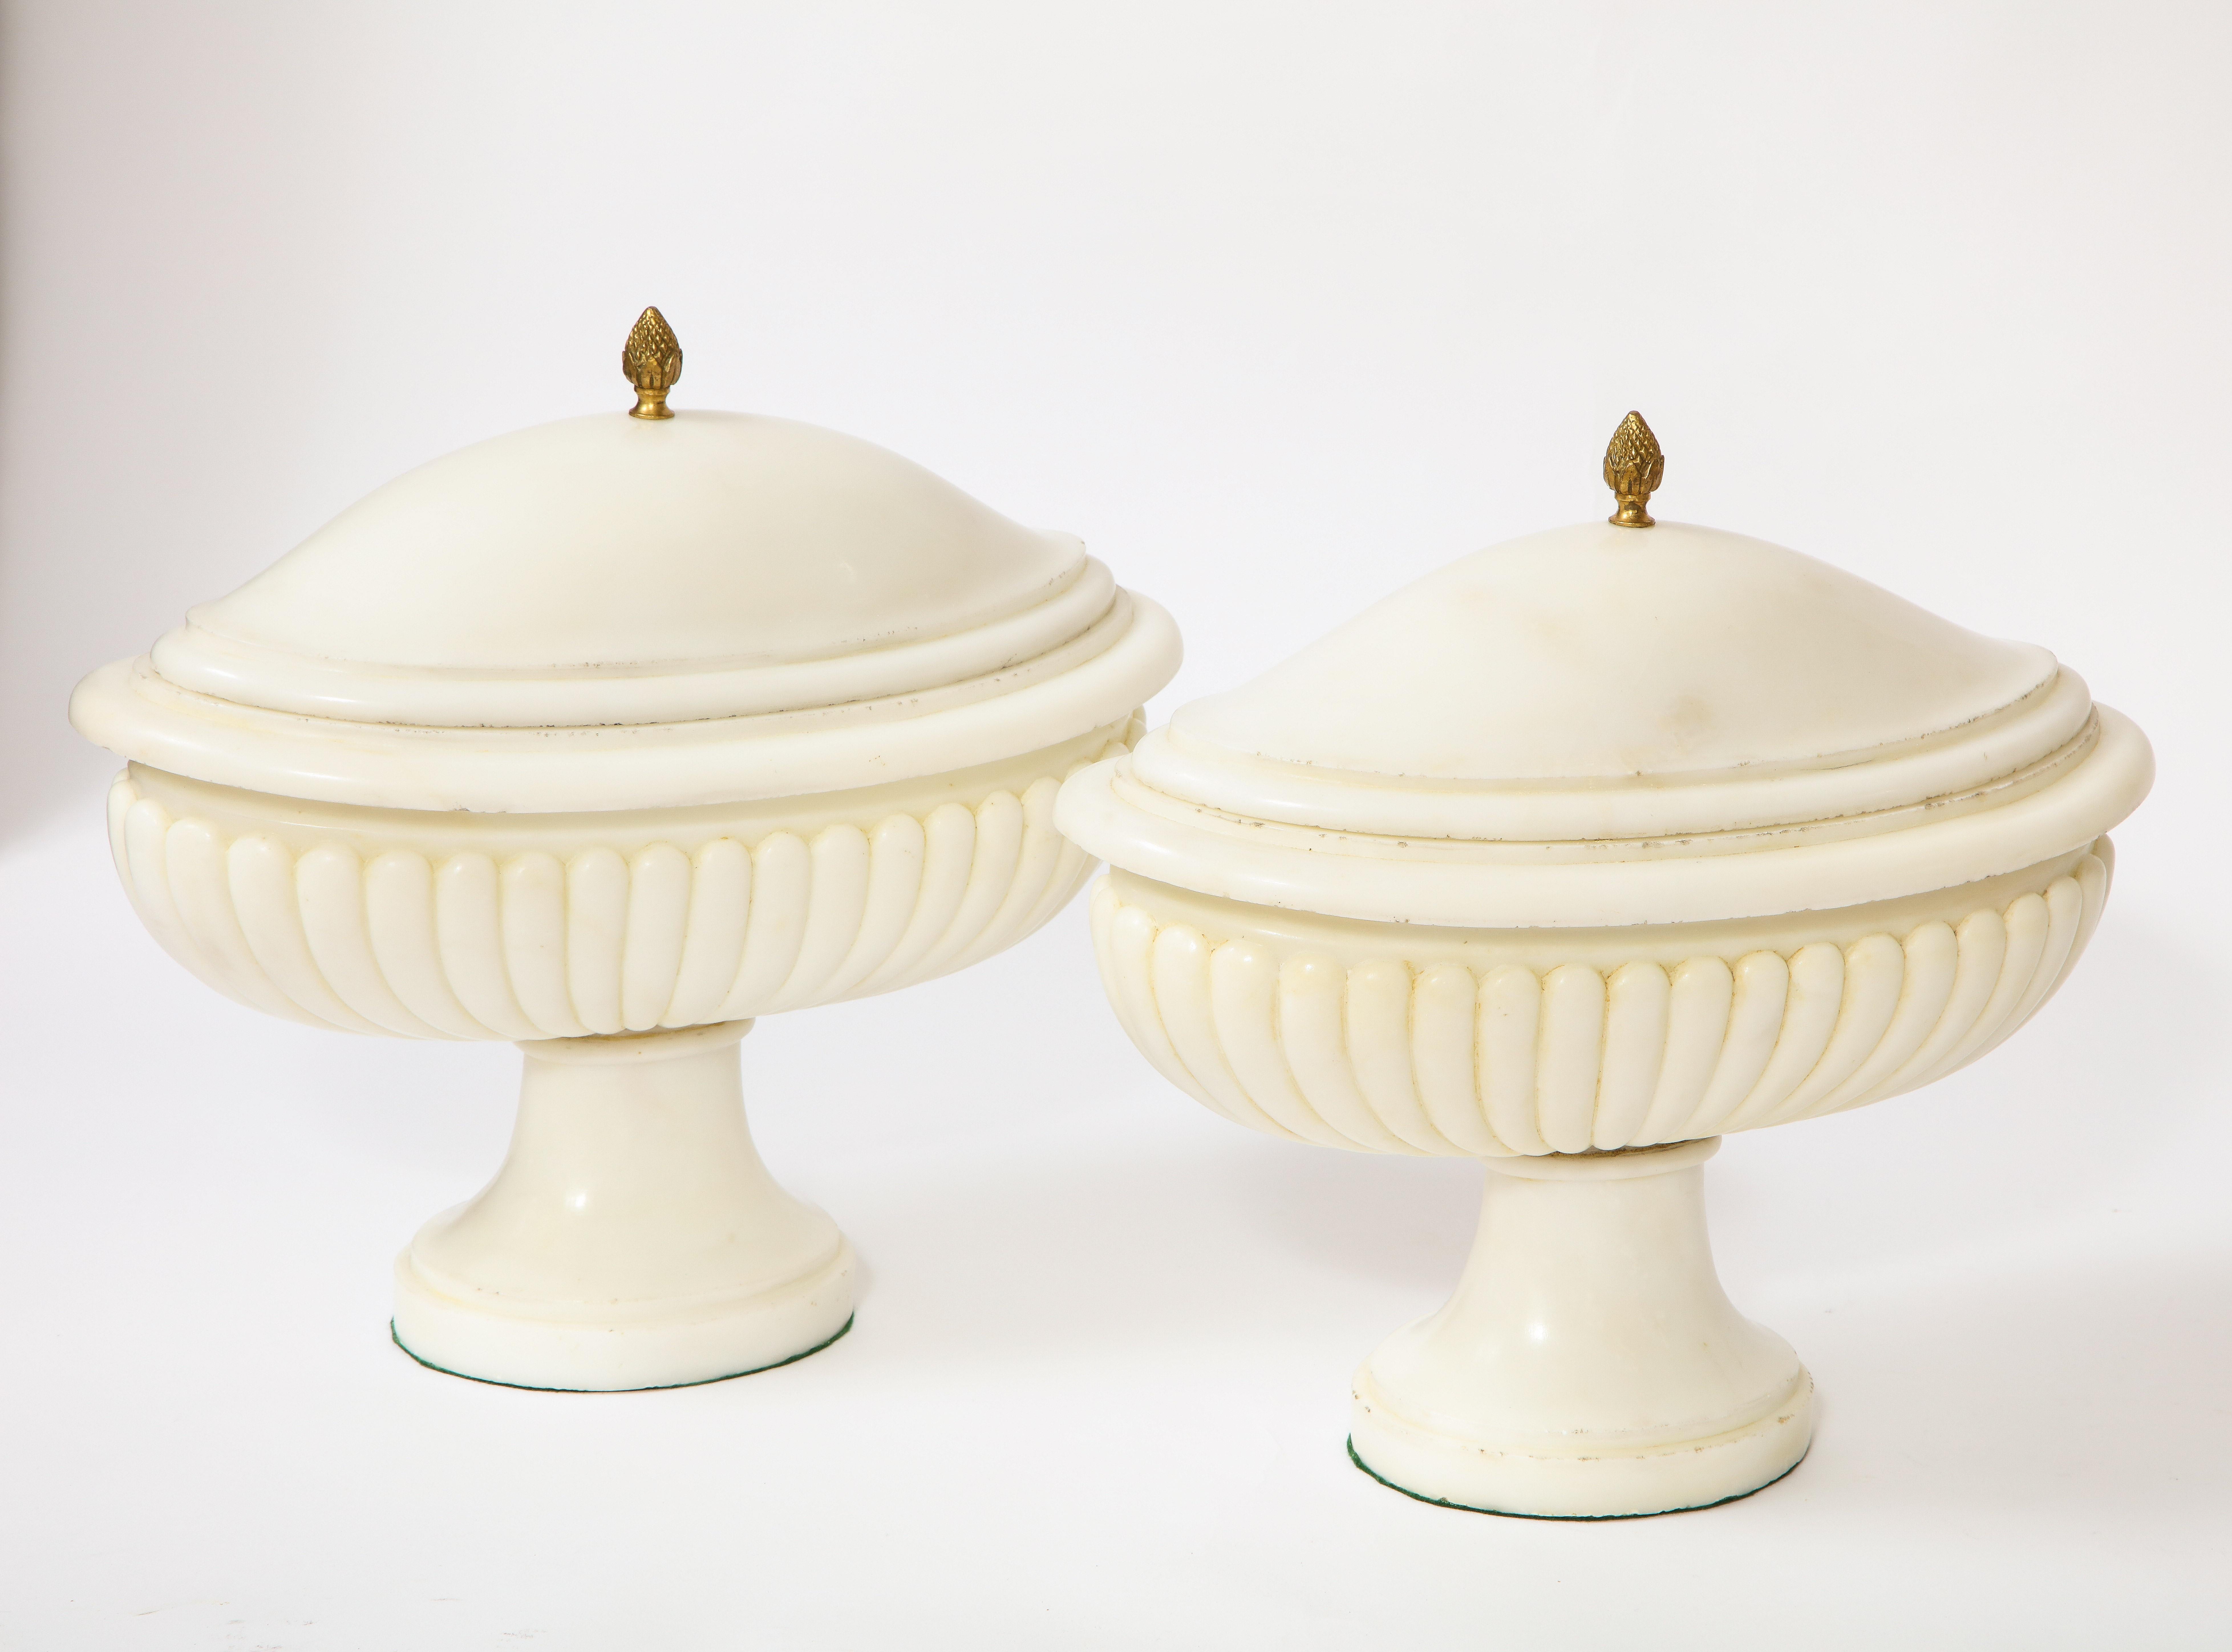 Gilt Pair of Italian Grand-Tour Neoclassical Hand-Carved Carrara Marble Covered Bowls For Sale